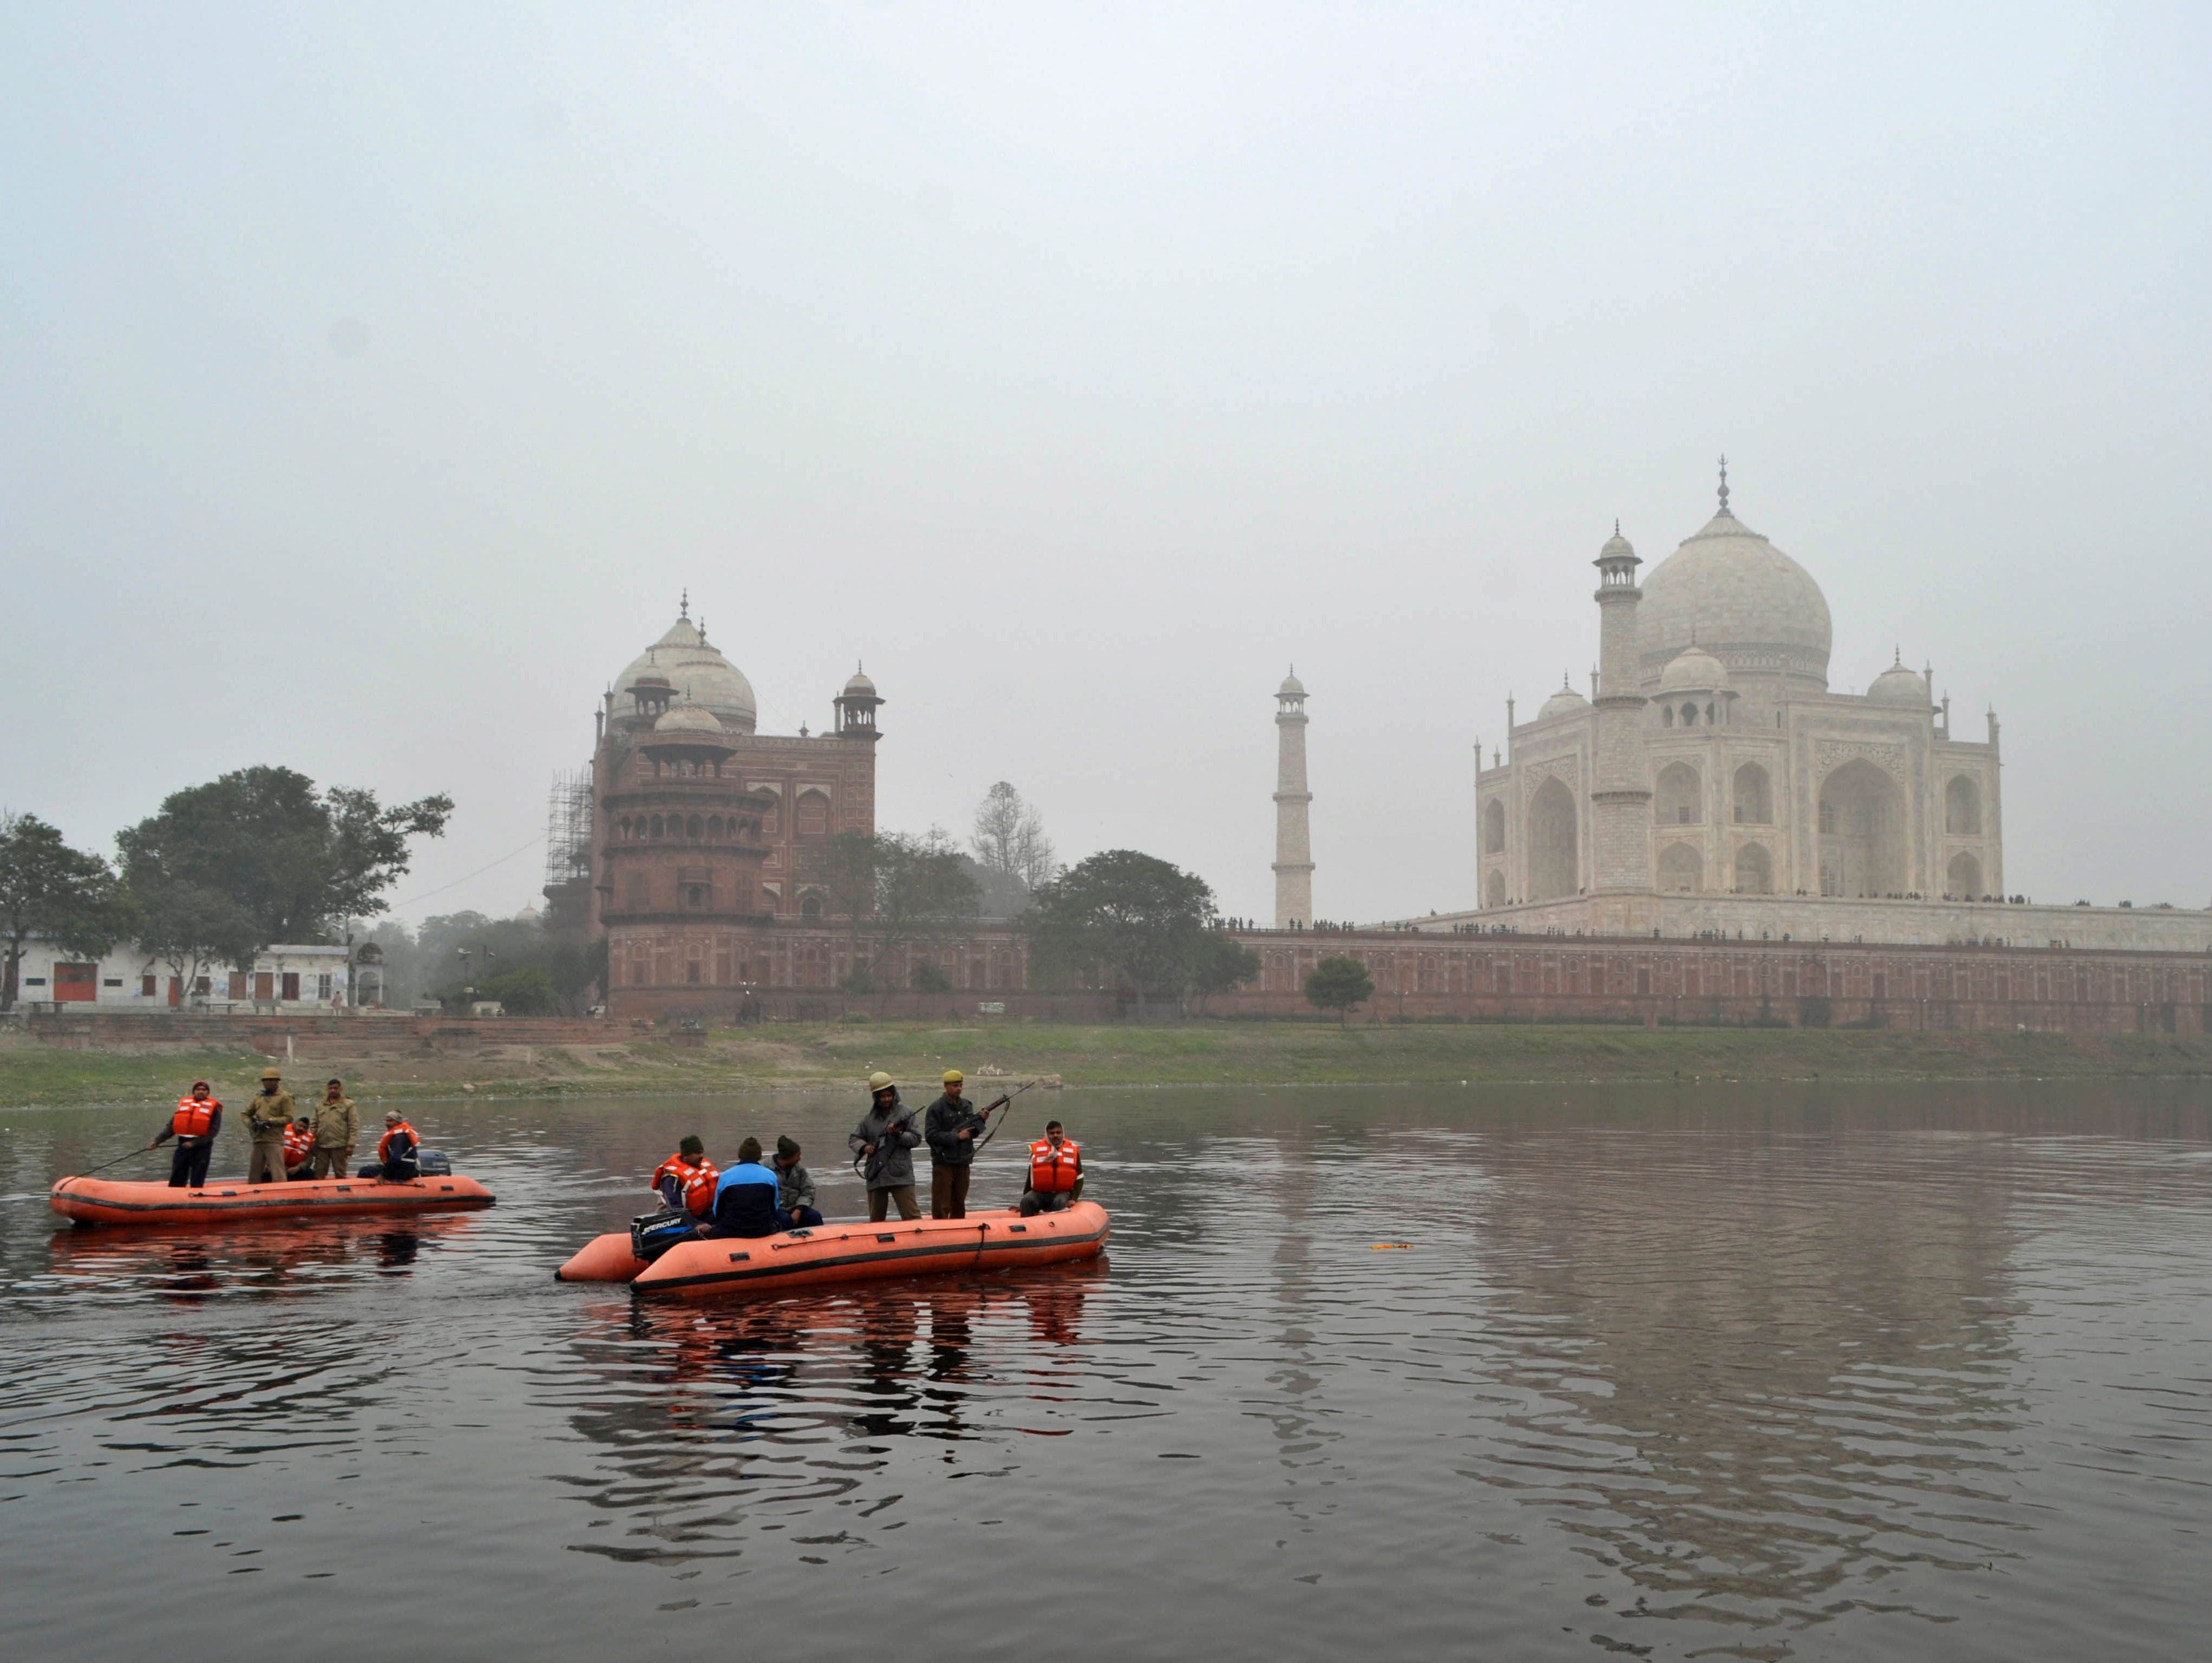 Indian policemen patrol through the Yamuna river passing the Taj Mahal monument in Agra, India, Saturday, Jan. 24, 2015. President Obama has cancelled his visit to the Taj Mahal during his stay in India in order to fly to Saudi Arabia.